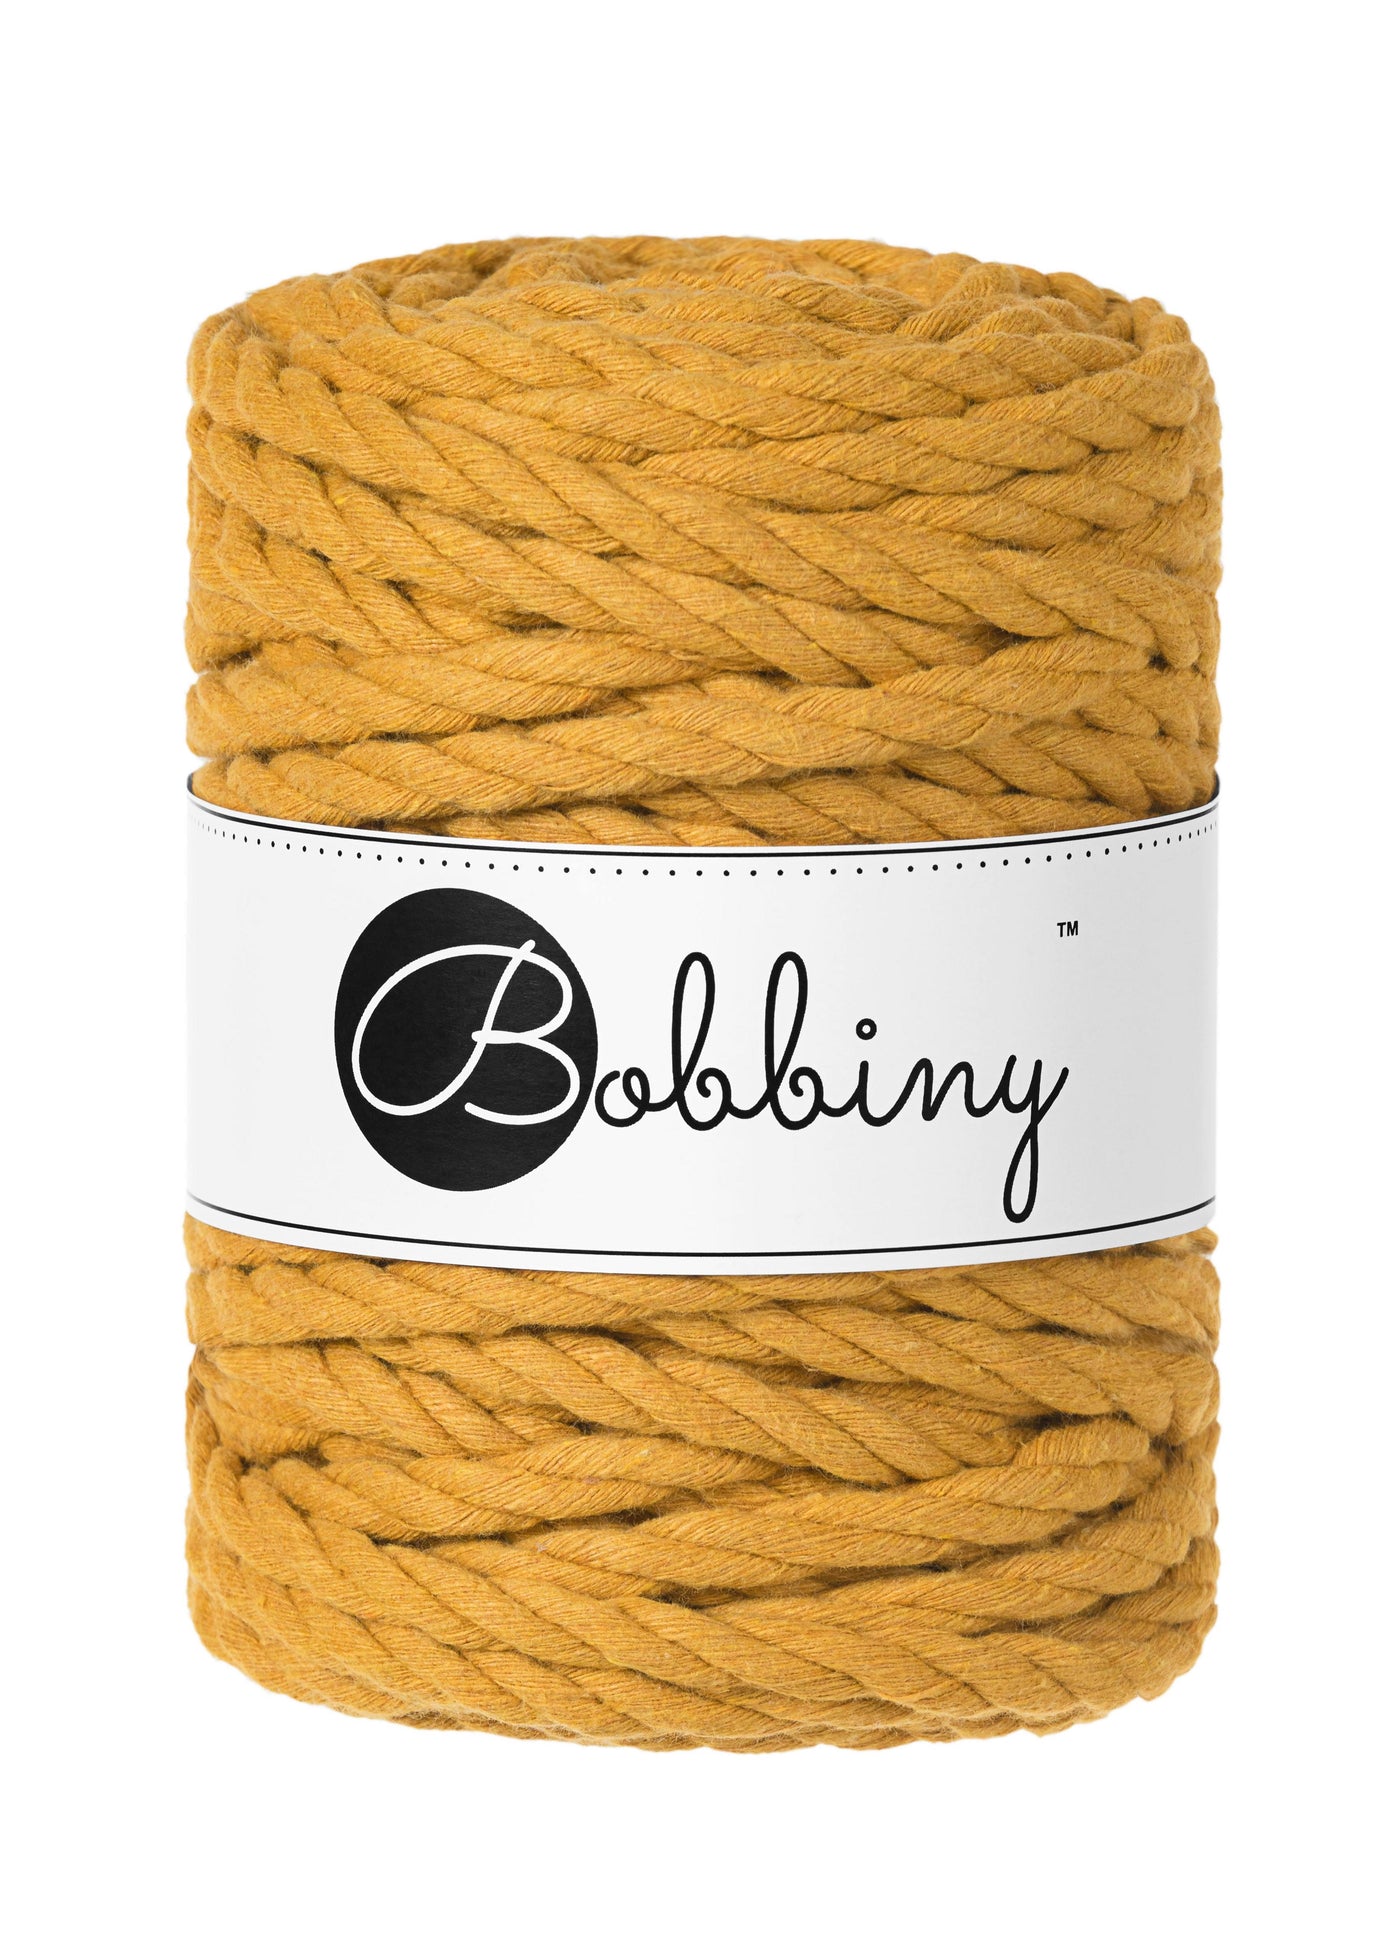 This superb product from Bobbiny is an amazing addition to their gorgeous range of products.  Shown here in the ever popular shade of 'Mustard'  Made from 100% recycled cotton, it is perfect for Macrame projects due to its sturdiness. They are non-toxic, certified safe for children and meet certified worldwide textile standards.  This super soft triple twist rope also makes the most spectacular fringes and tassels.  Length: 30m/32 yards